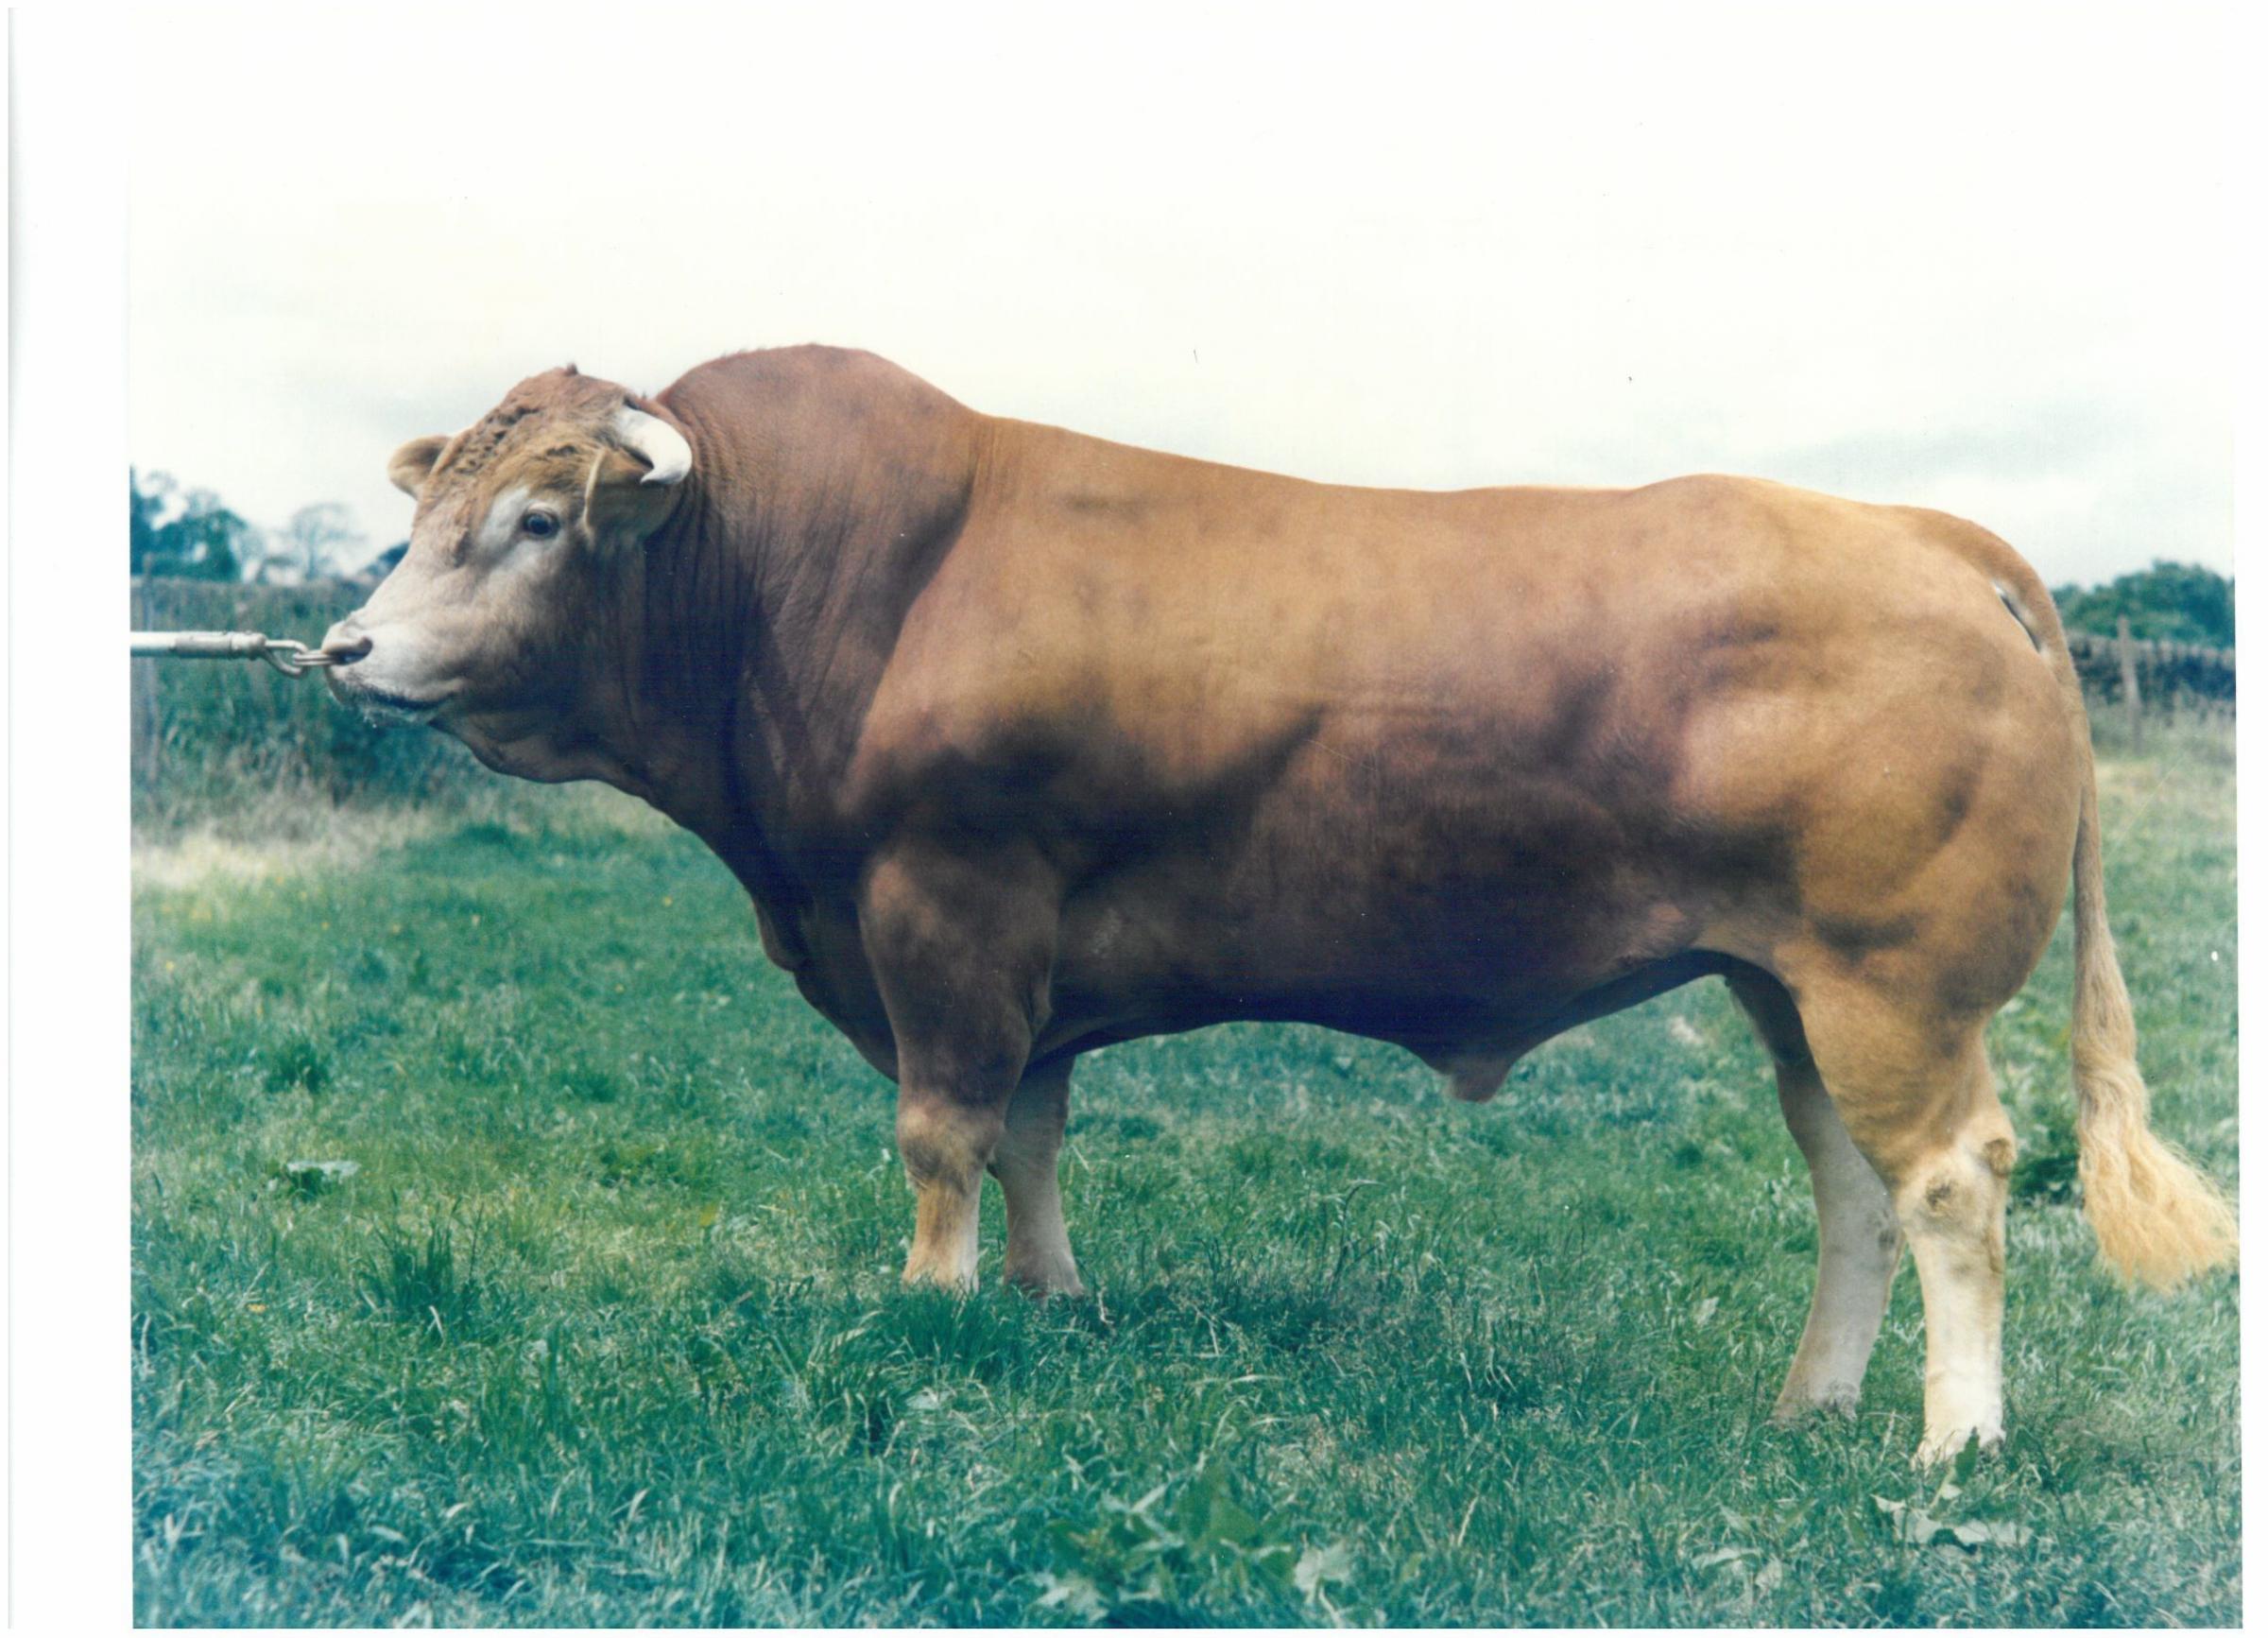 Fanfaron – one of the first imports and sold widely by MMB Milk Marketing Board